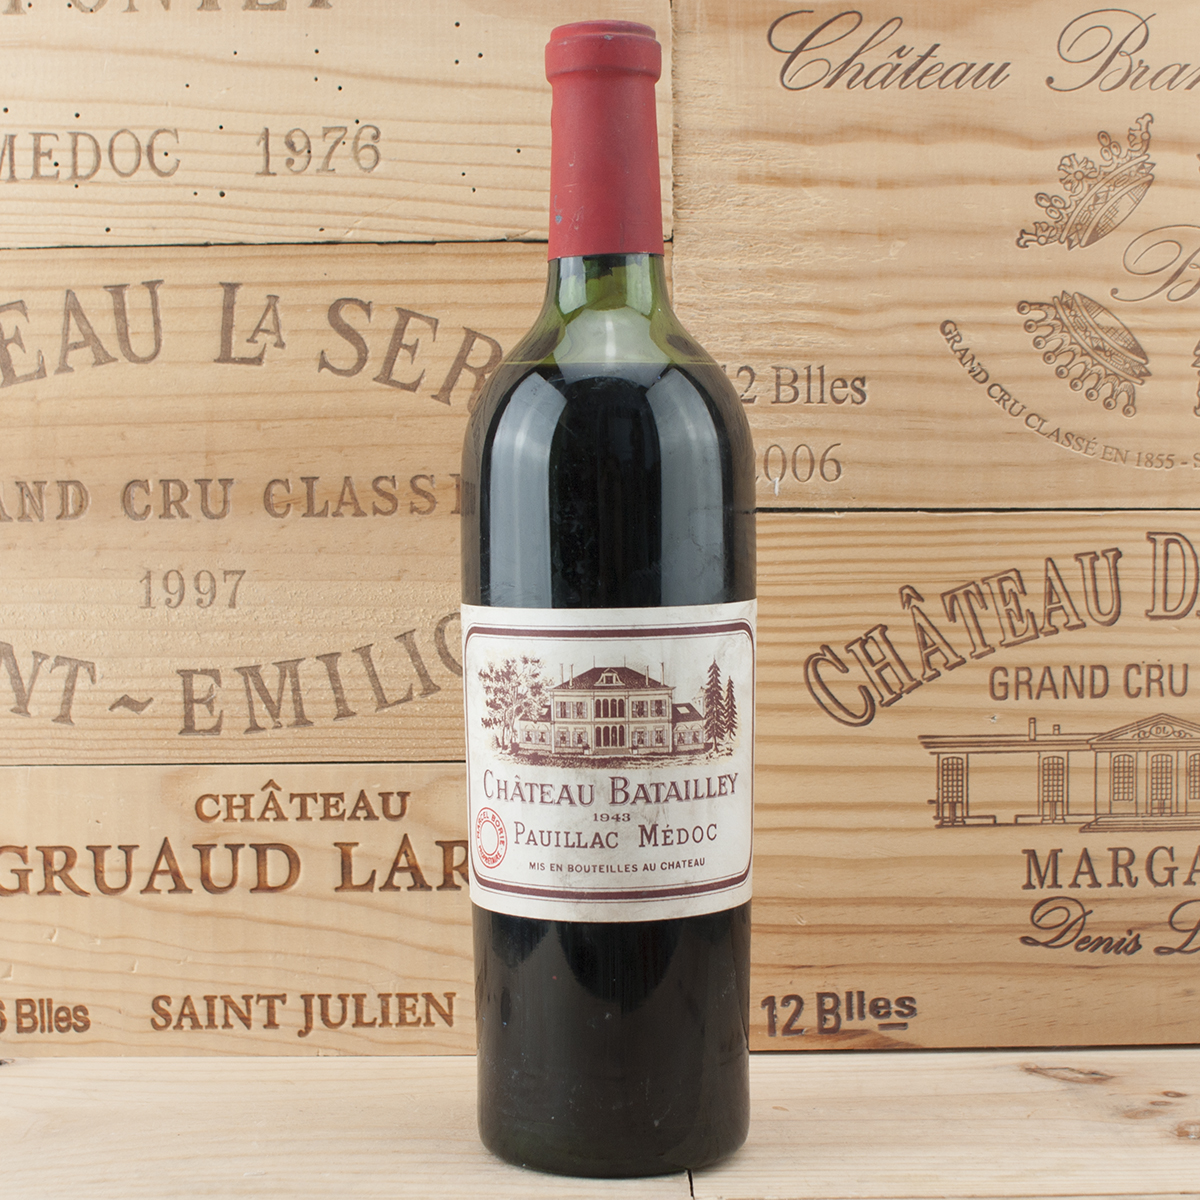 1943 Chateau Batailley